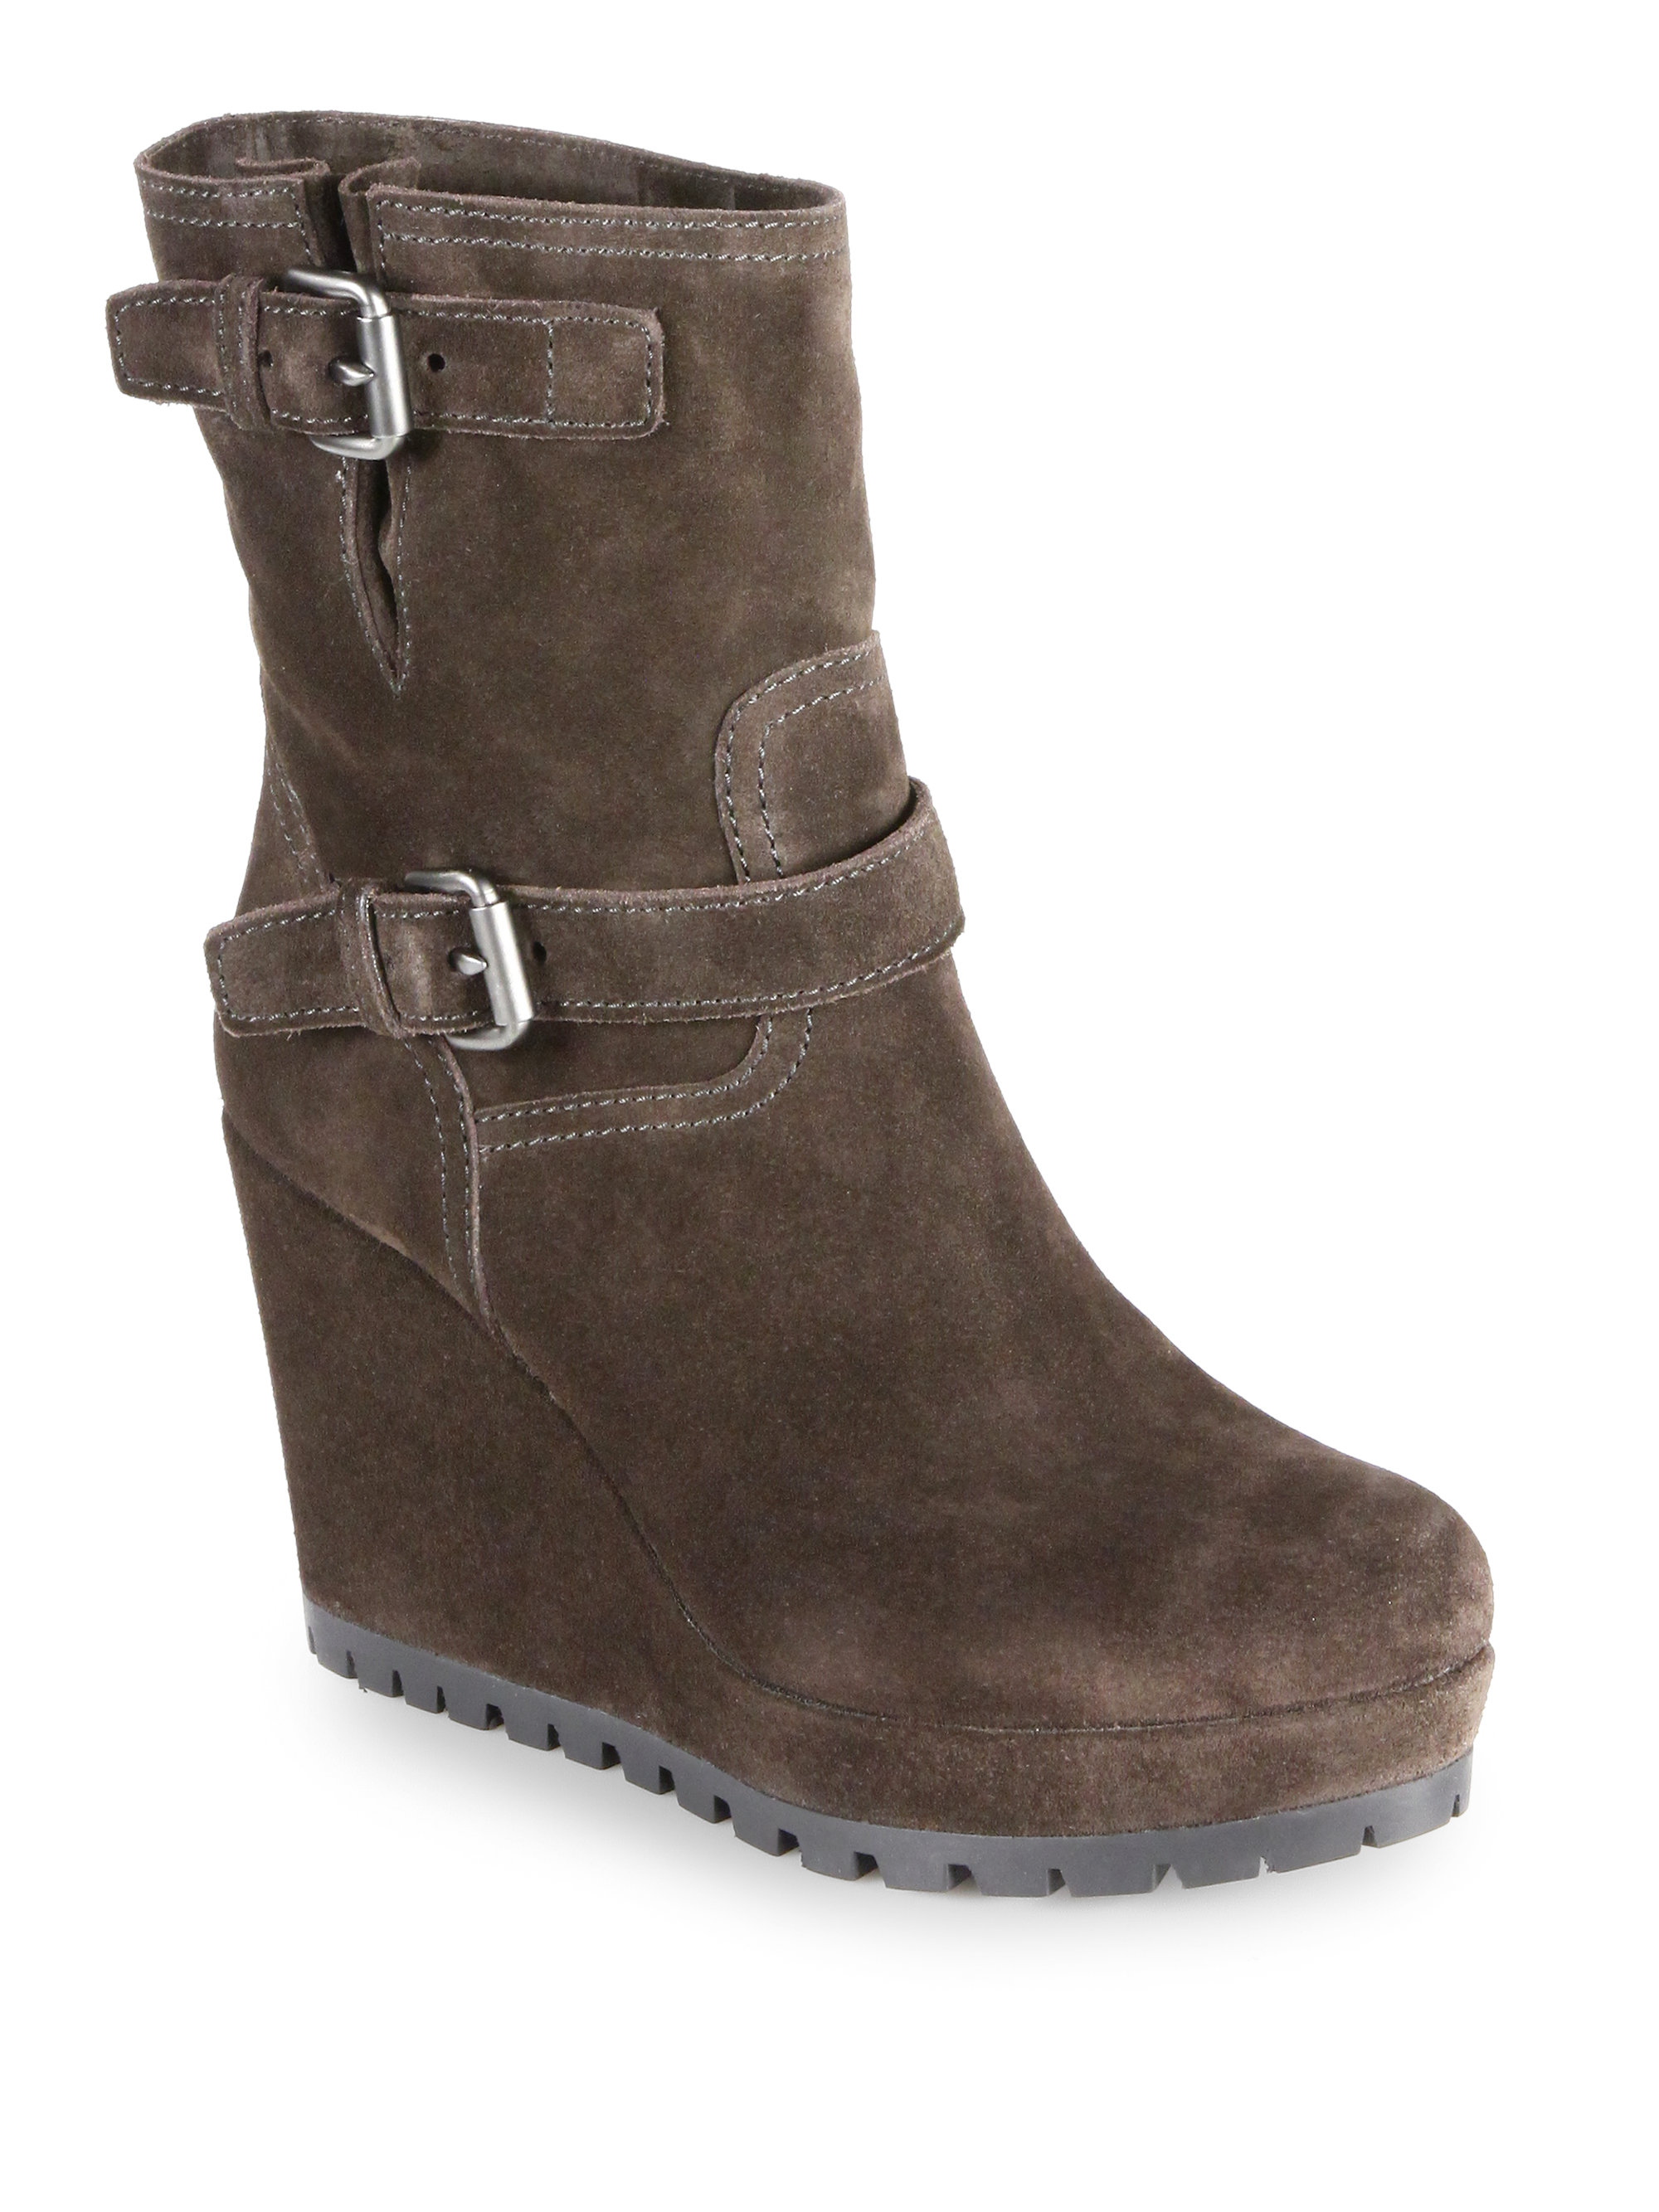 Prada Suede Doublebuckle Midcalf Wedge Boots in Gray (MORO-BROWN) | Lyst